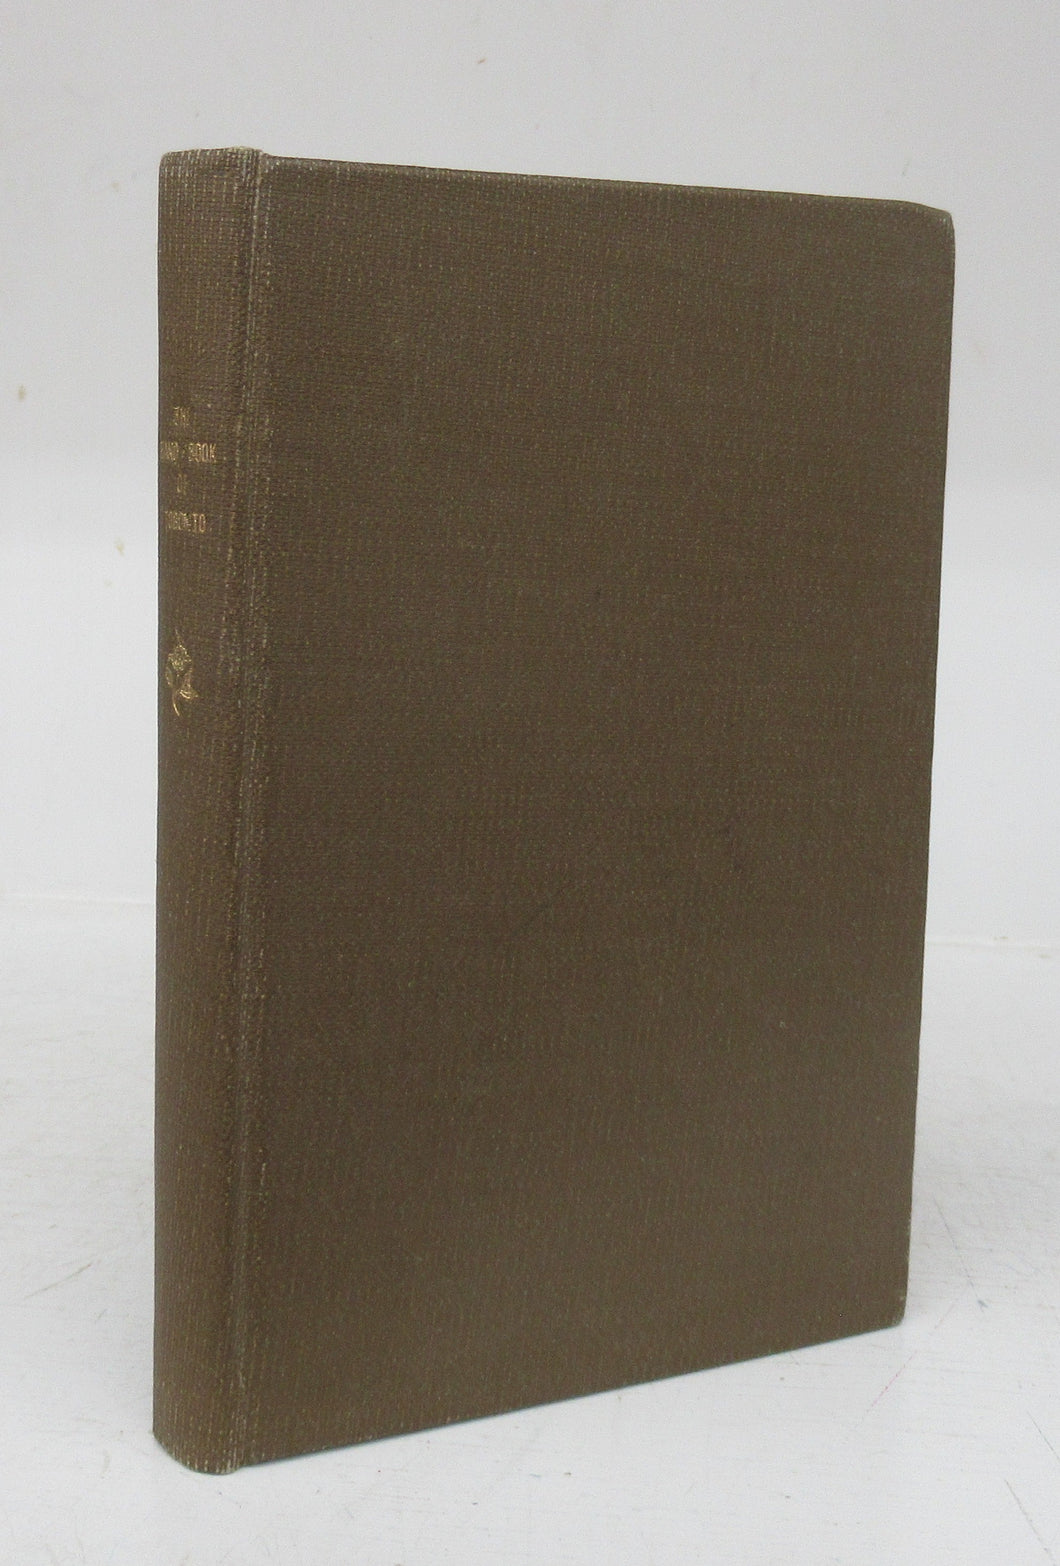 The Hand-Book of Toronto; Containing its Climate, Geology, Natural History, Educational Institutions, Courts of Law, Municipal Arrangements, &c. &c.